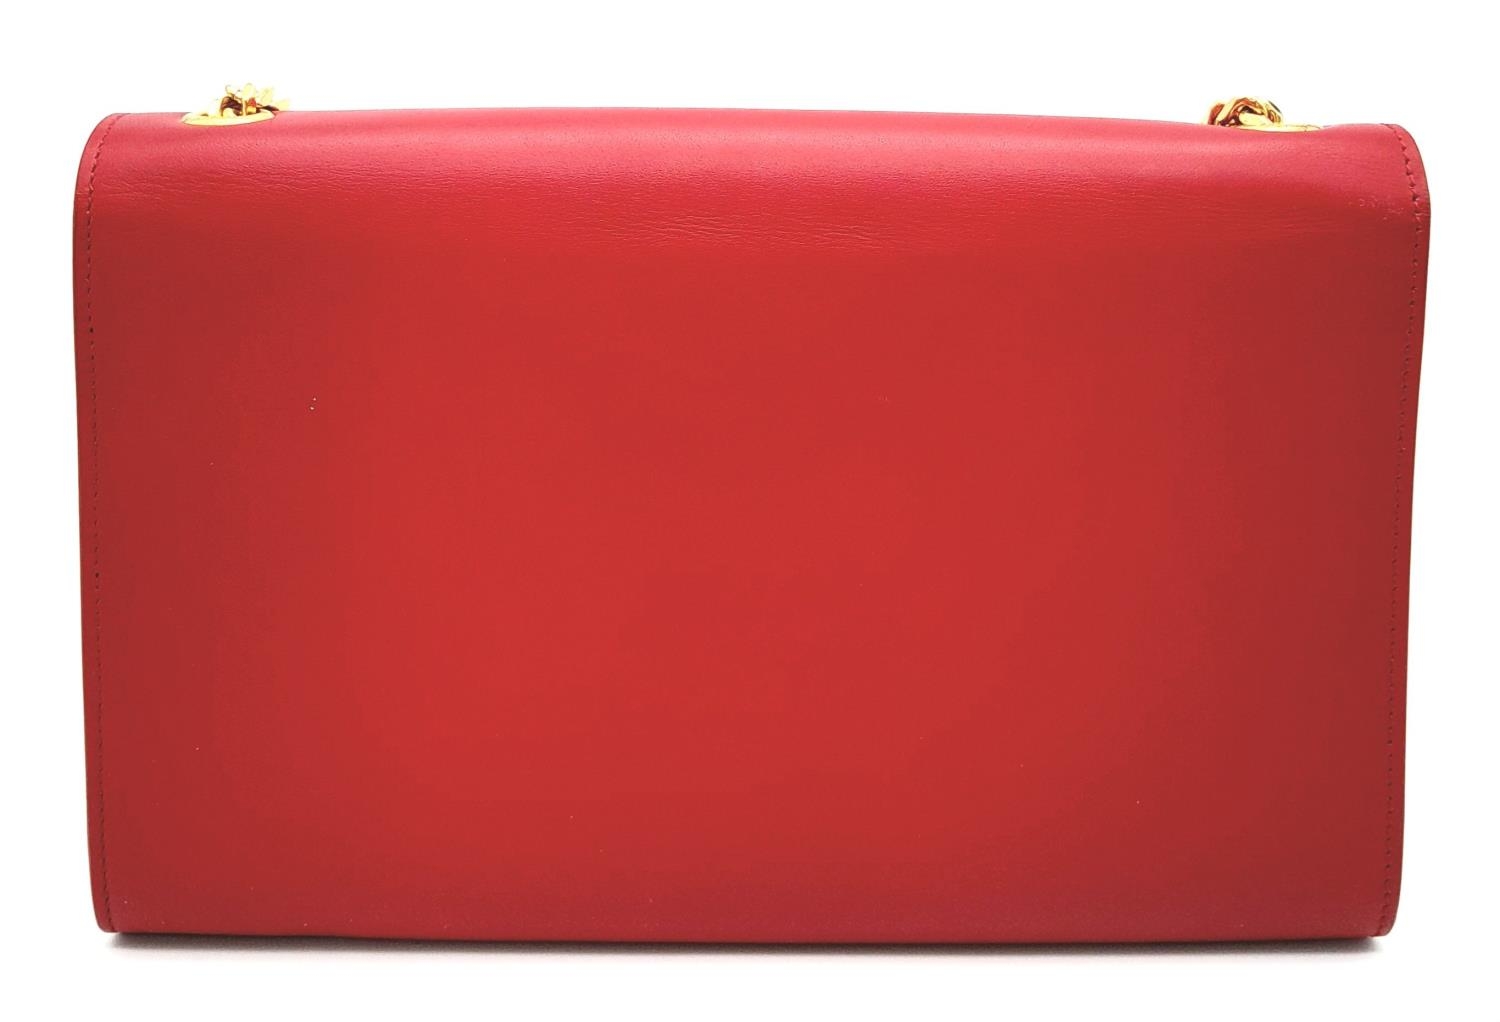 A YSL Red Kate Tassel Crossbody Bag. Leather exterior with gold-toned hardware, the iconic YSL logo, - Image 2 of 12